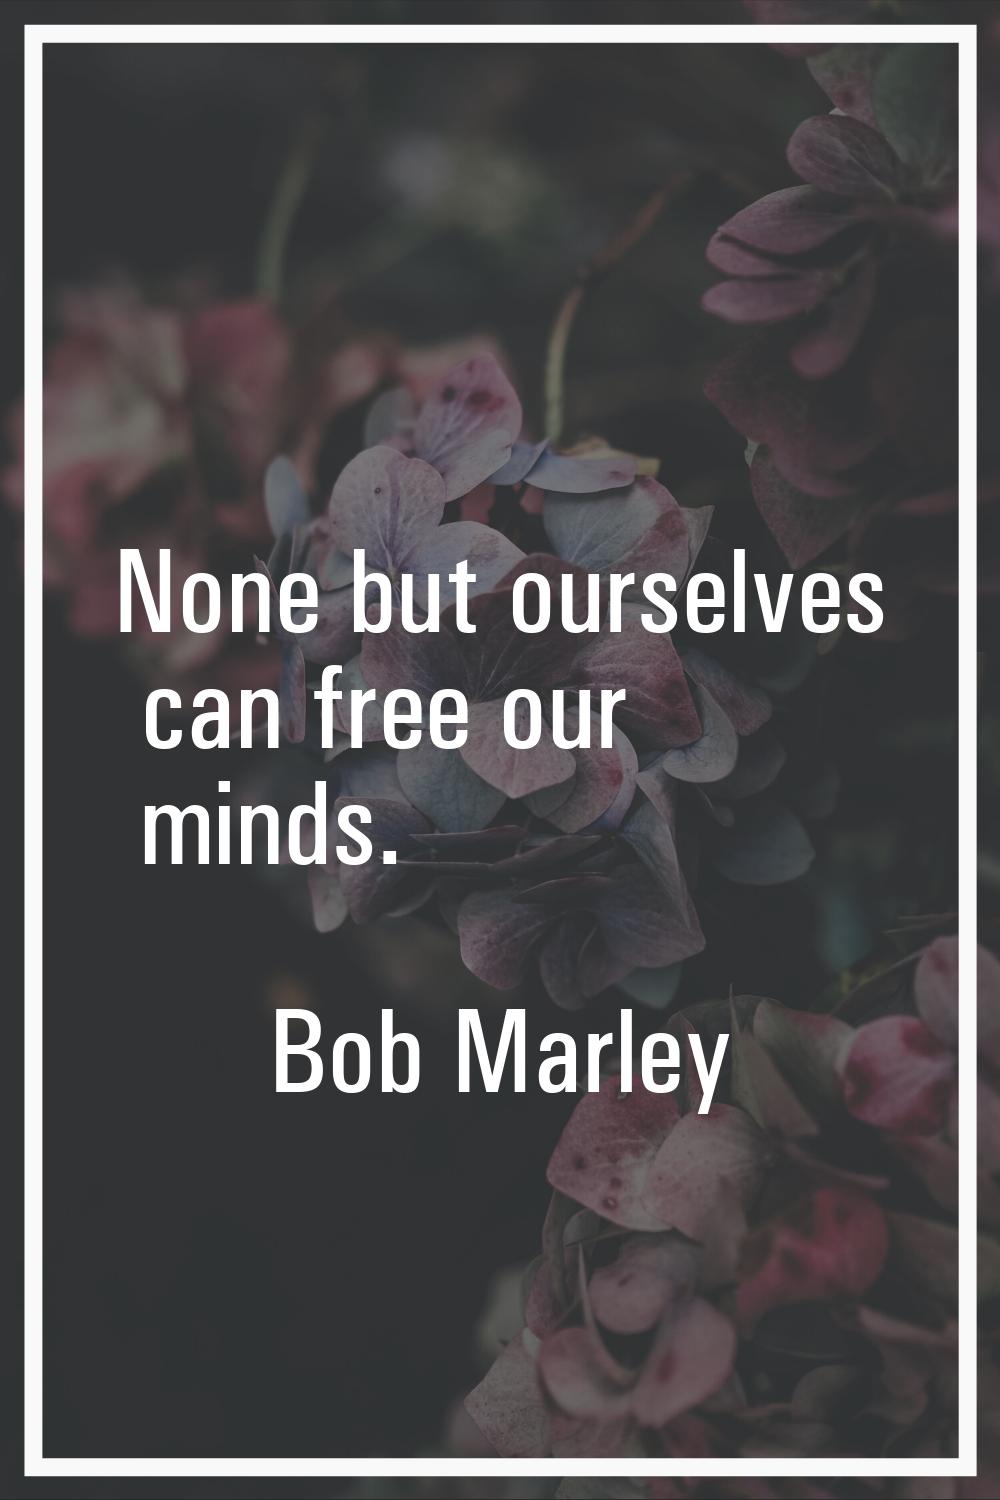 None but ourselves can free our minds.